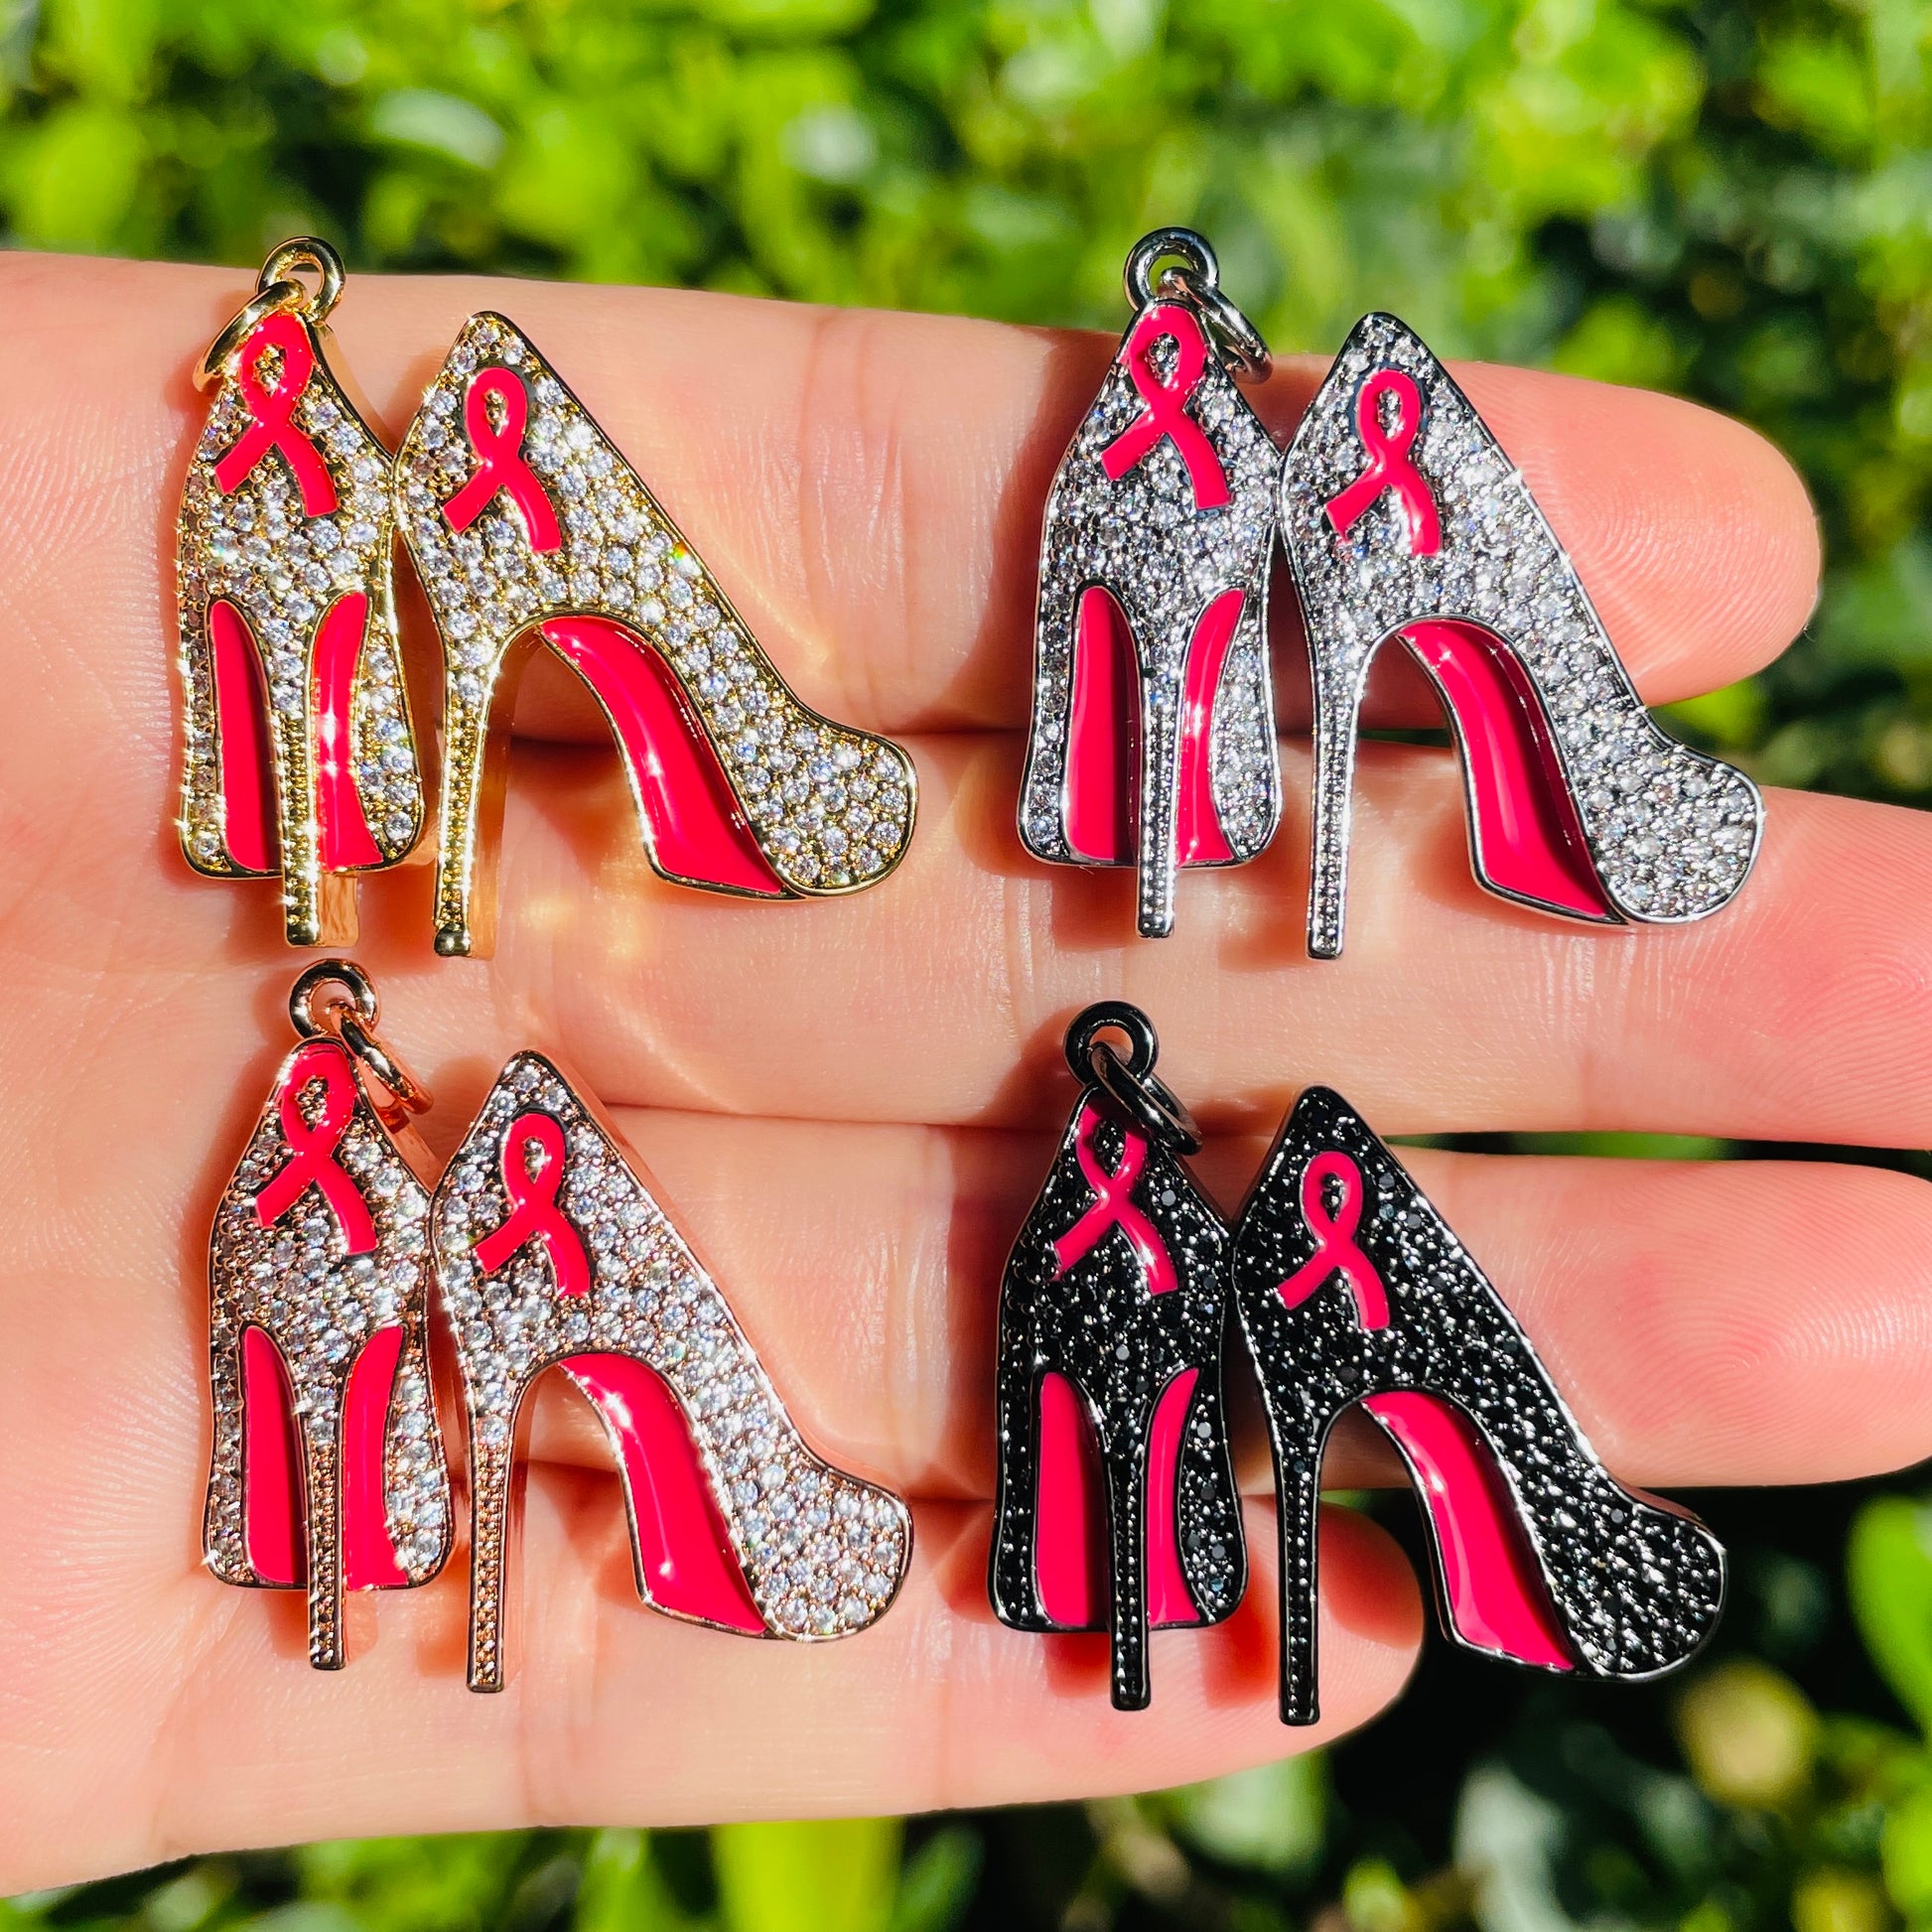 10pcs/lot CZ Pave Pink Ribbon High Heels Charms - Breast Cancer Awareness Mix Colors CZ Paved Charms Breast Cancer Awareness High Heels New Charms Arrivals Charms Beads Beyond